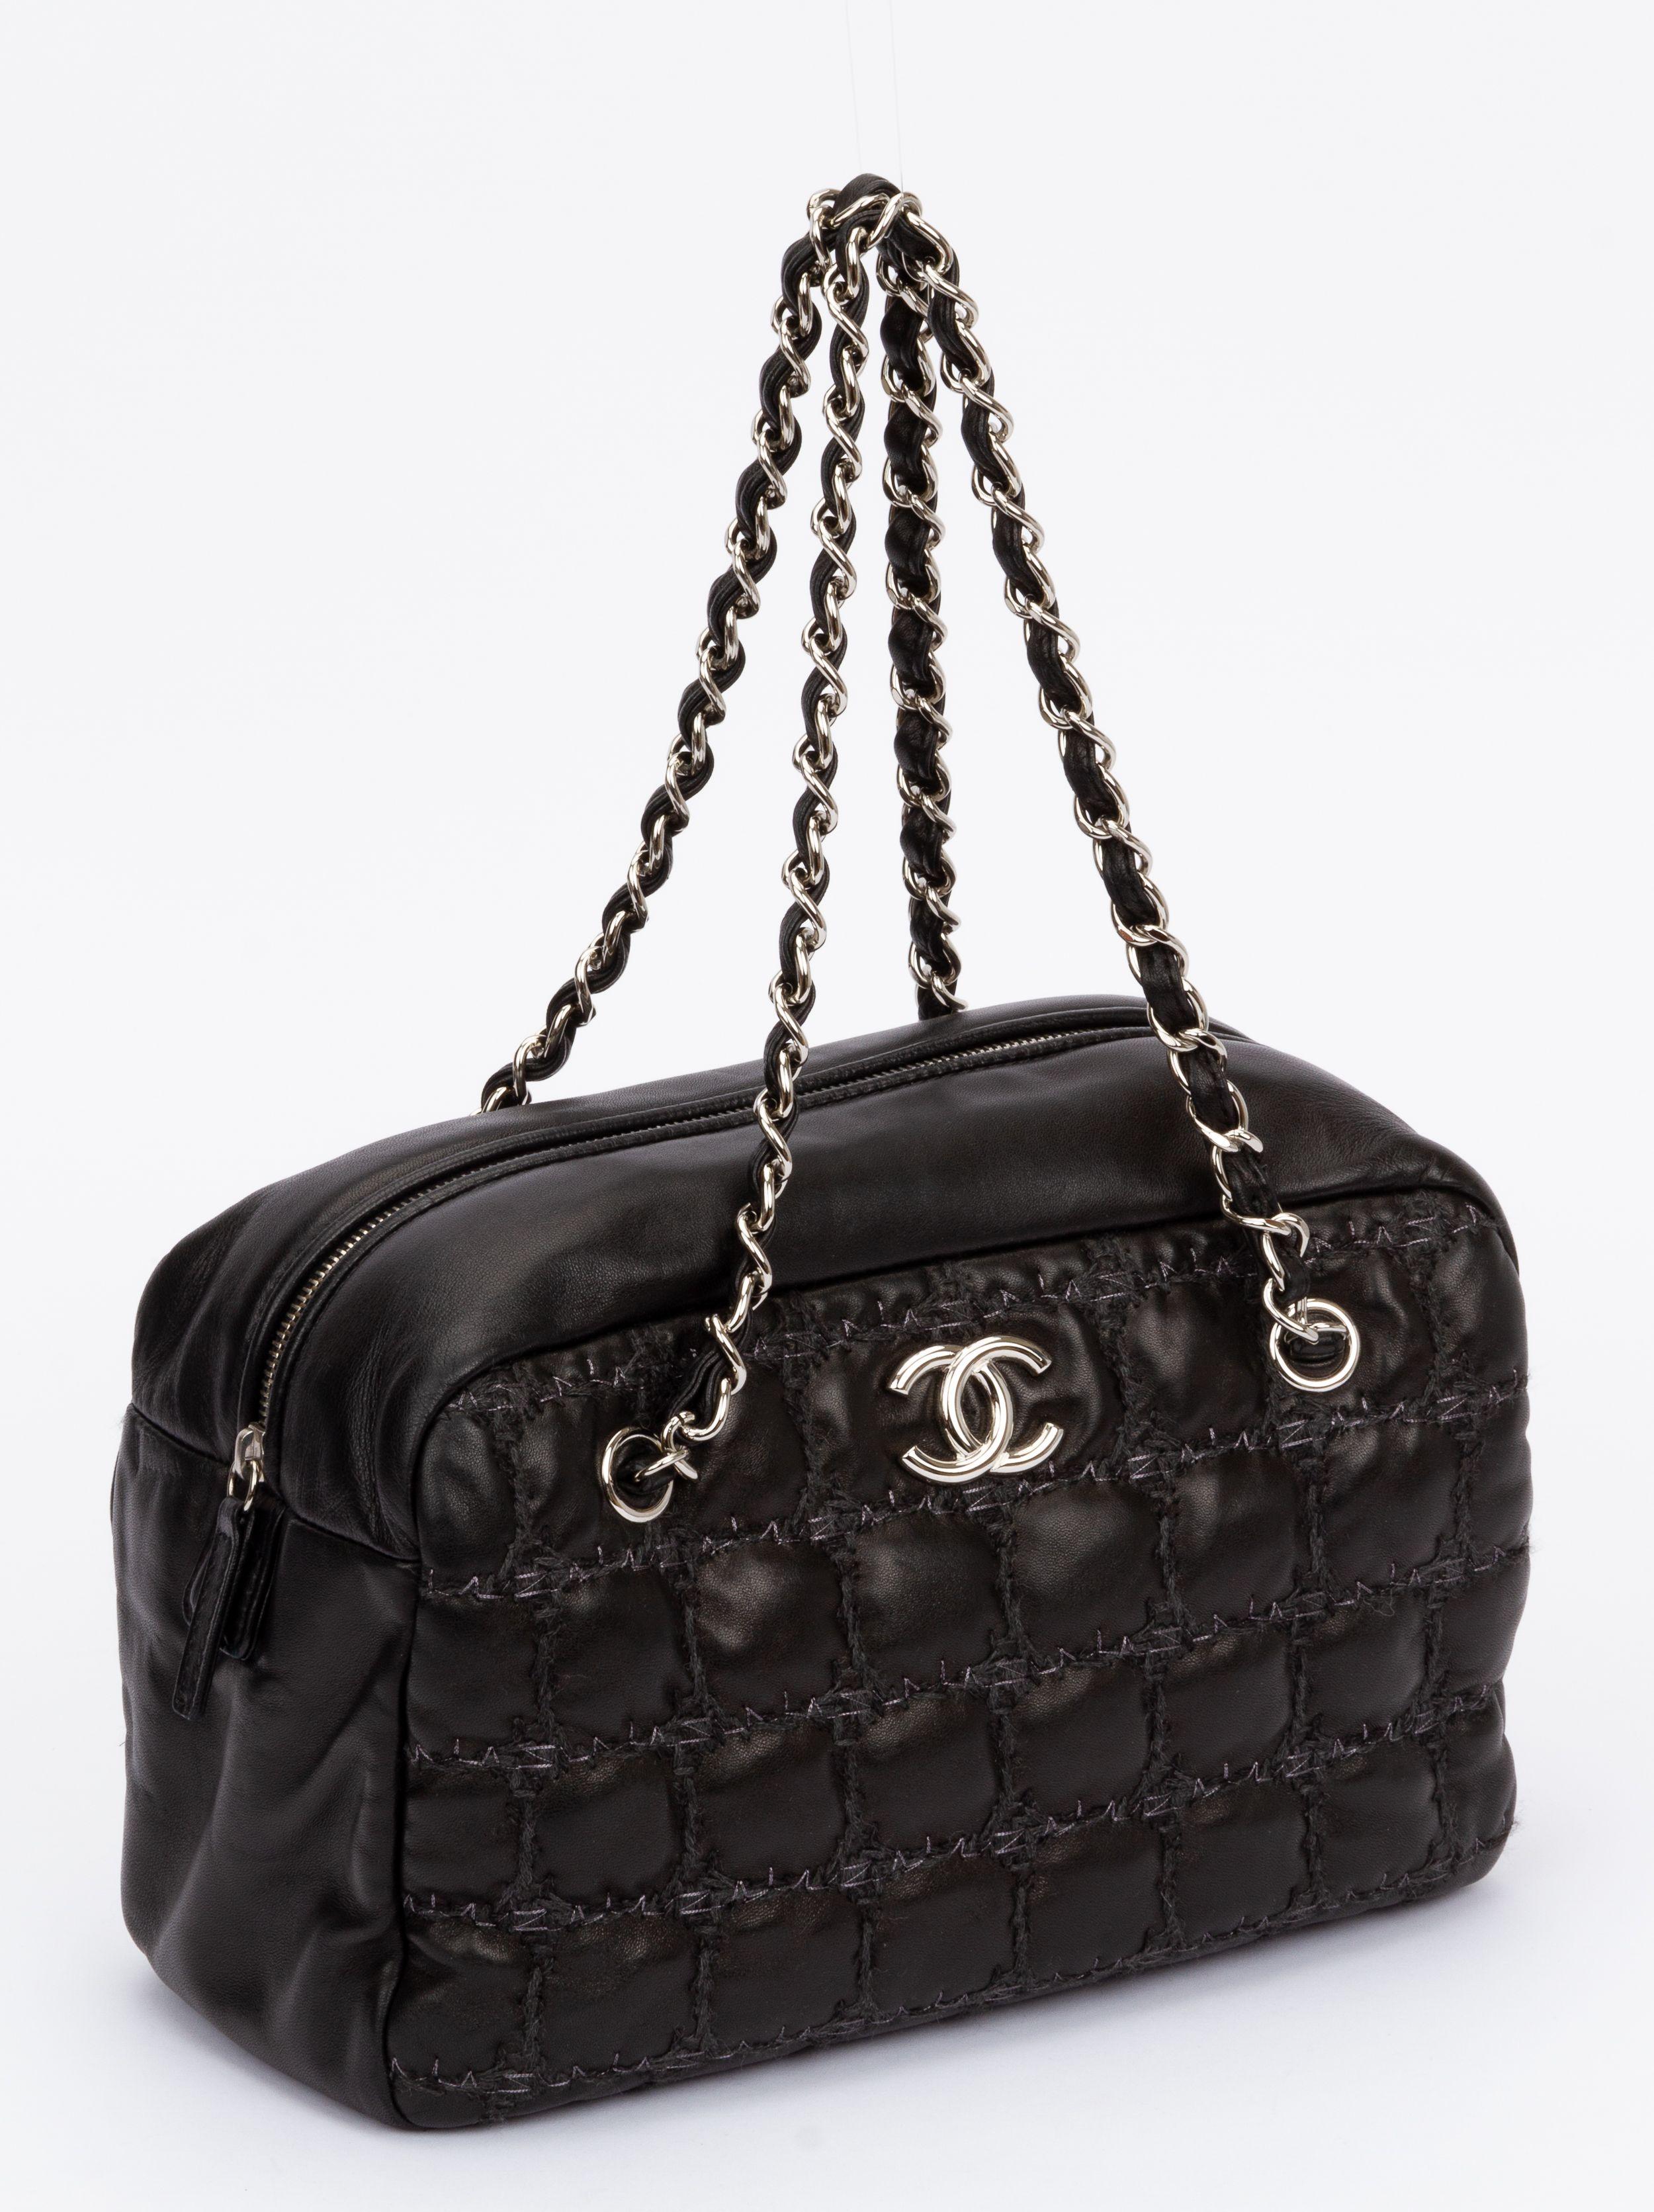 Chanel tweed on square stitch bubble bowler bag crafted of lambskin. Comes with silver hardware and a shoulder strap (drop 8'). On front of the bag is a CC logo. The interior is grey made of satin. The bag has the authenticity hologram and card as